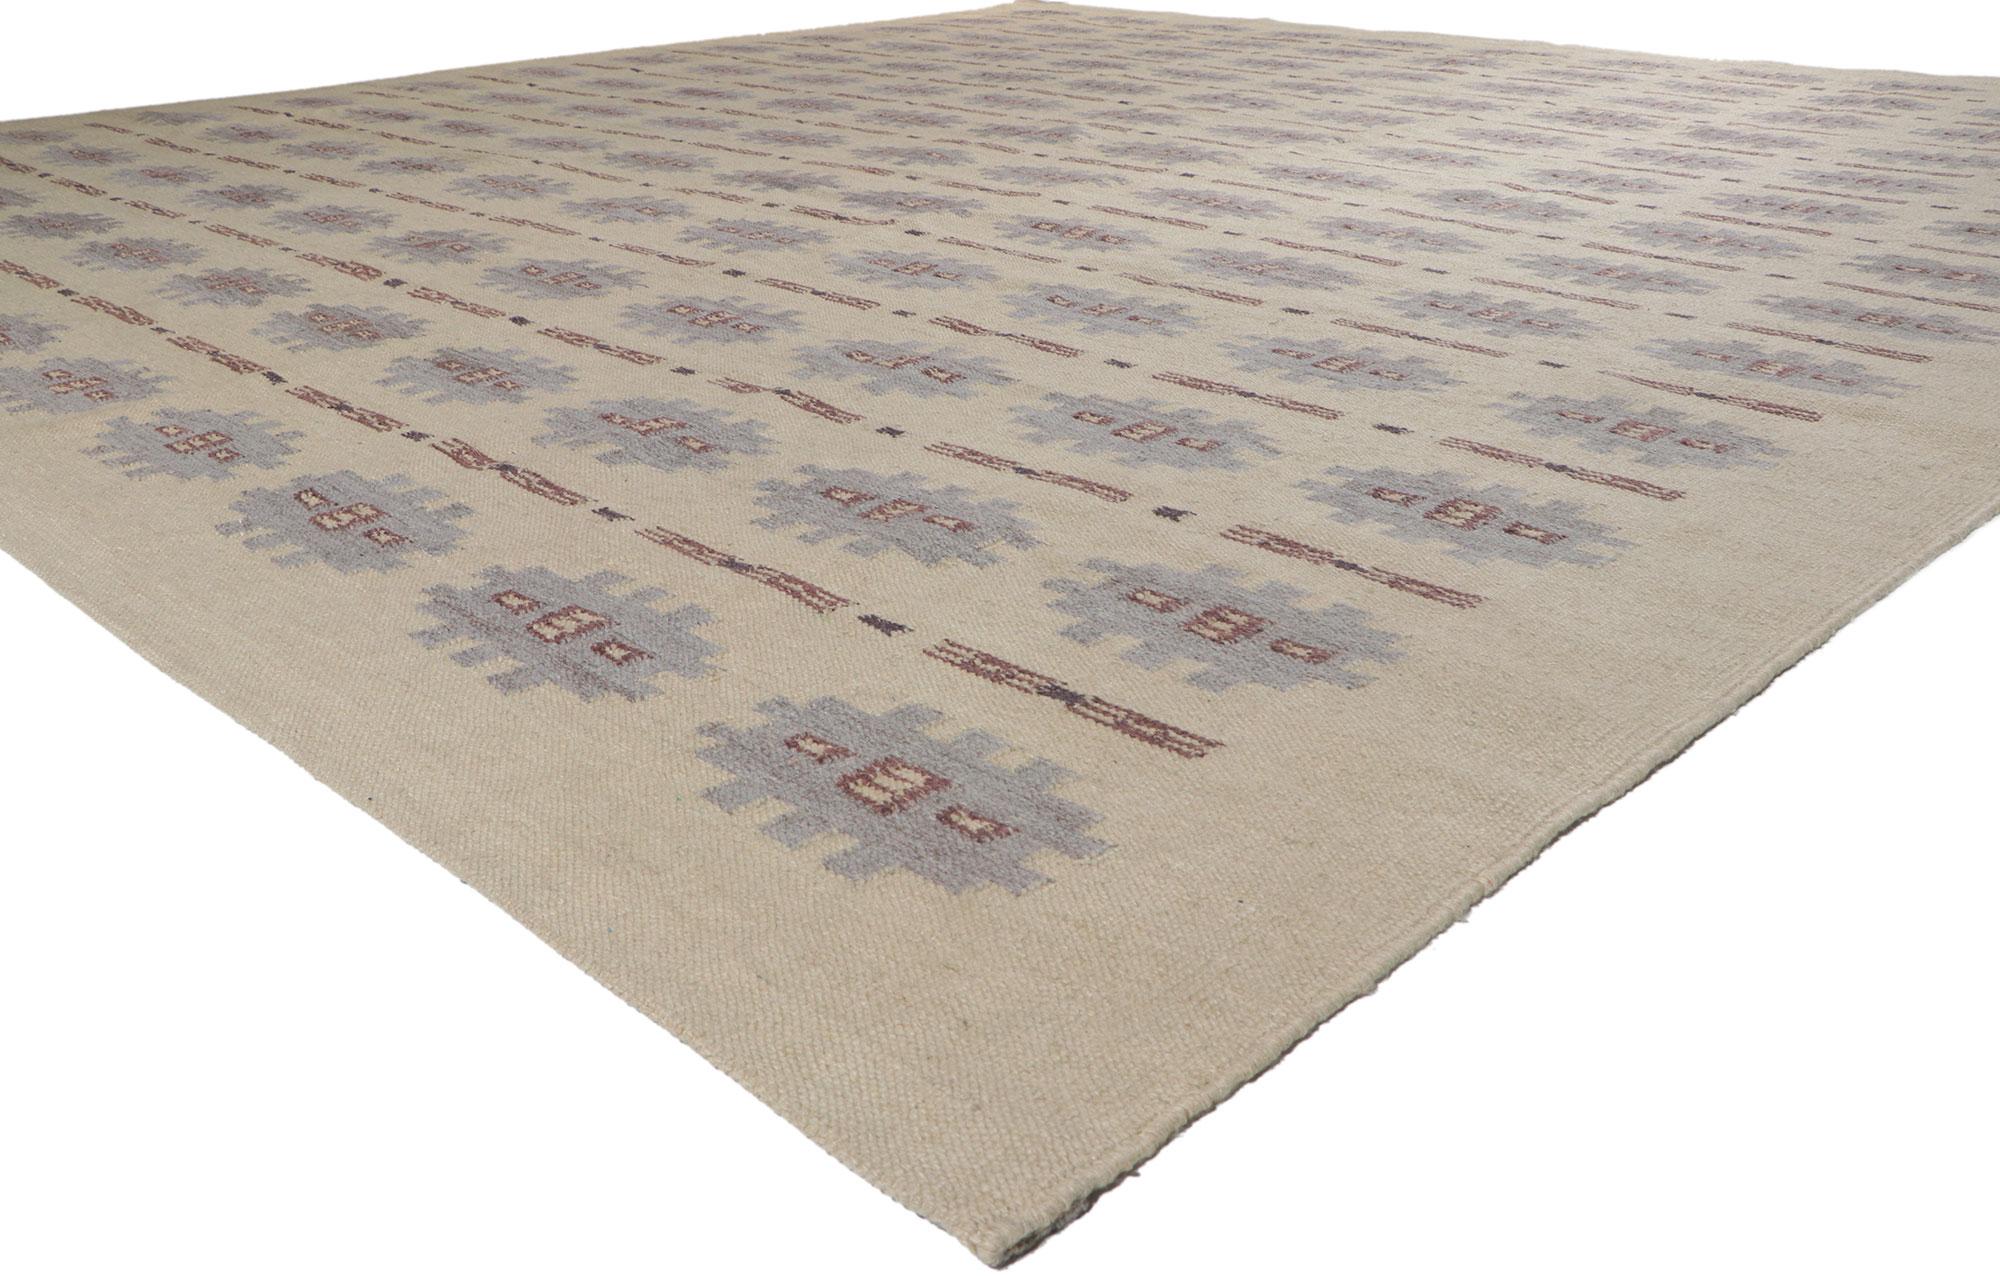 30791 New Swedish Inspired Kilim rug with Scandinavian Modern Style 14'05 x 15'00. With its geometric design and bohemian hygge vibes, this hand-woven wool Swedish Kilim rug beautifully embodies the simplicity of Scandinavian modern style. The